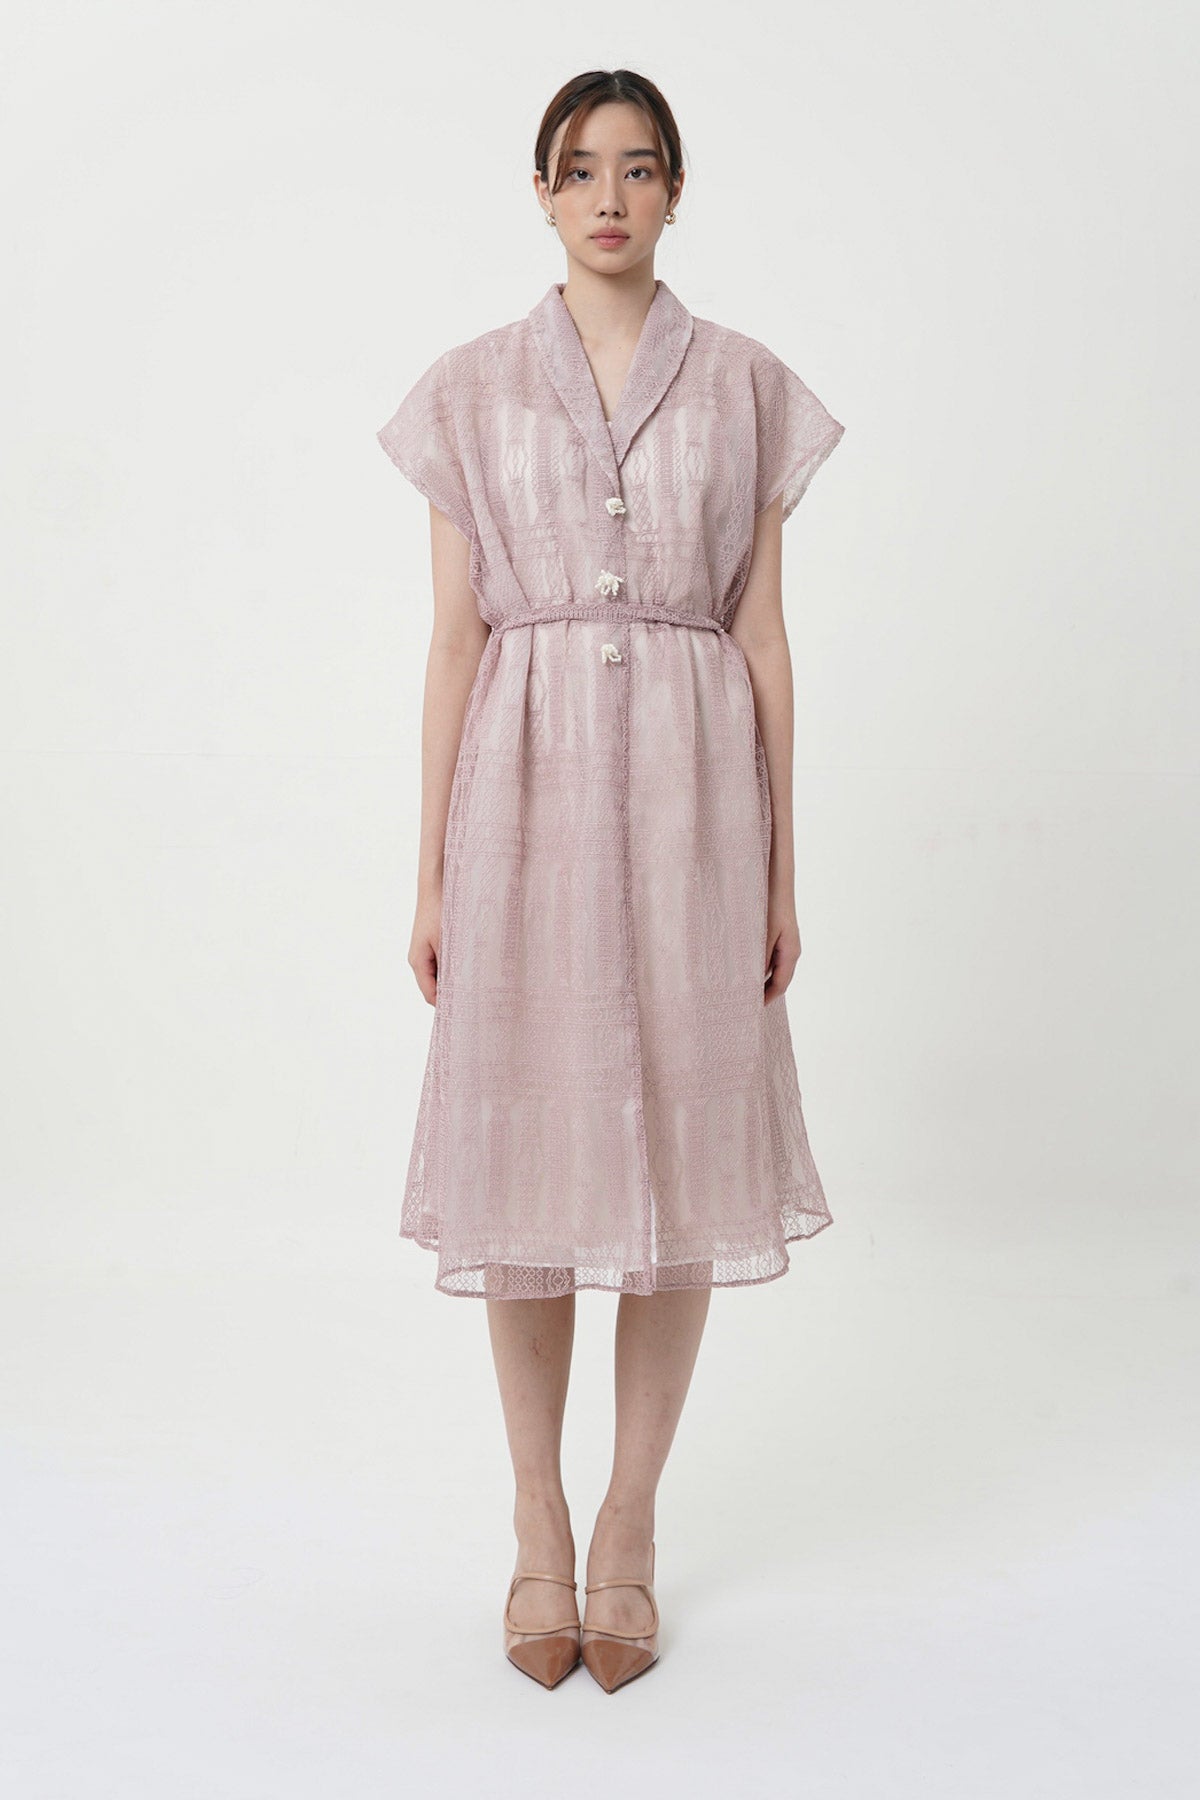 Ysella Outer Dress In Dusty Pink